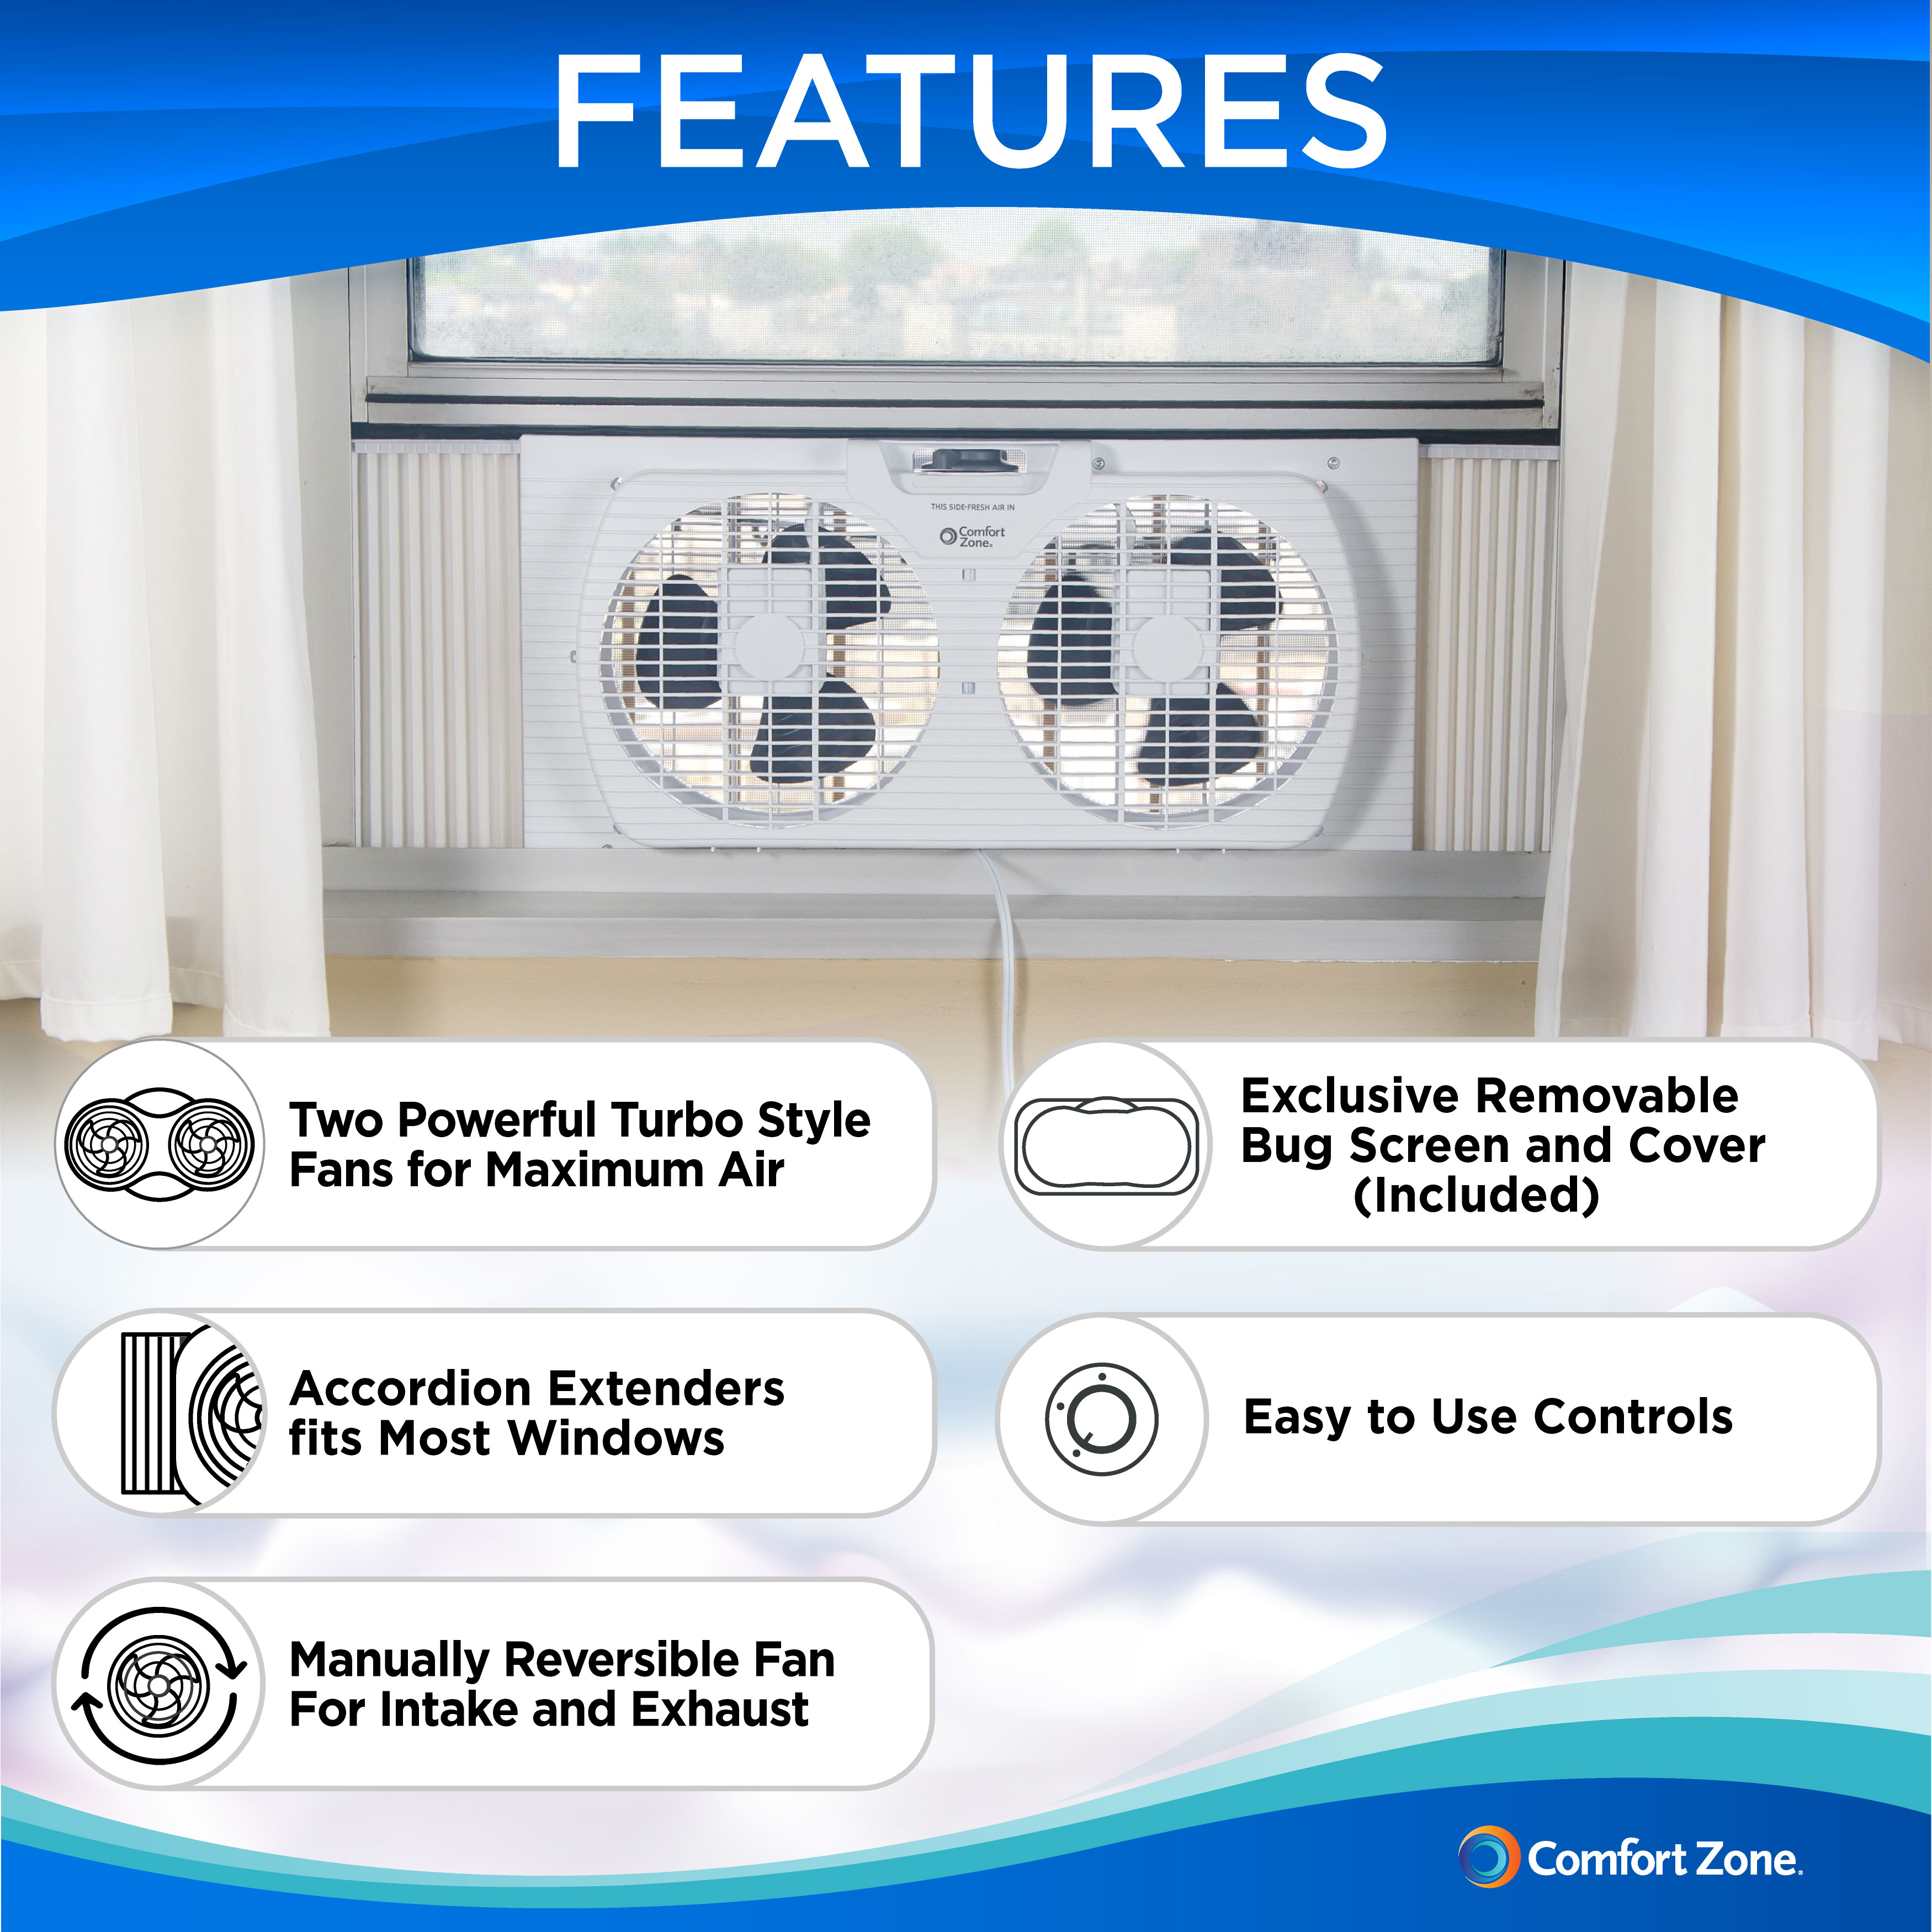 Comfort Zone 9" Twin Window Fan with Reversible Airflow Control, Auto-Locking Expanders and 2-Speed Fan Switch, White - image 2 of 7